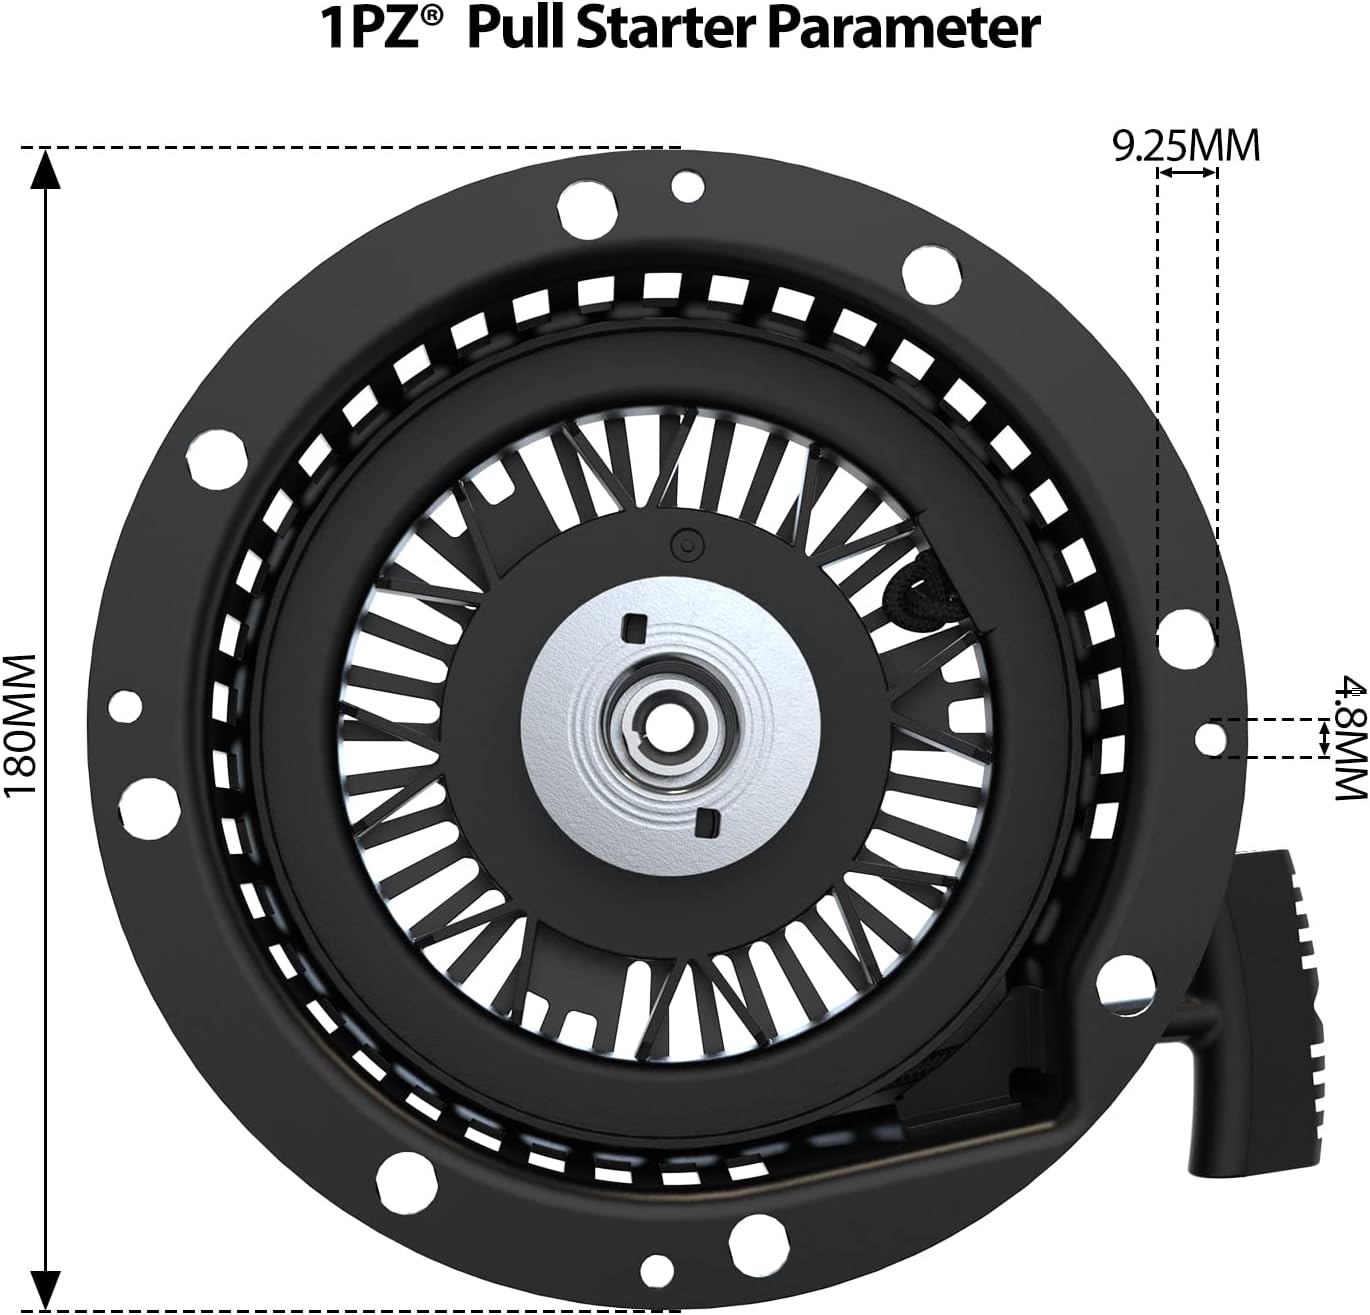 1PZ RS7-W08 Recoil Starter Pull Start Replacement for Tecumseh 590704 HM80 HM100 OHH45 OHH50 OHH55 OHH60 OHH65 OHV125 TVM195 TVM220 590736 590746 590748 590748A 590671 590788 5.5HP to 10HP Engine